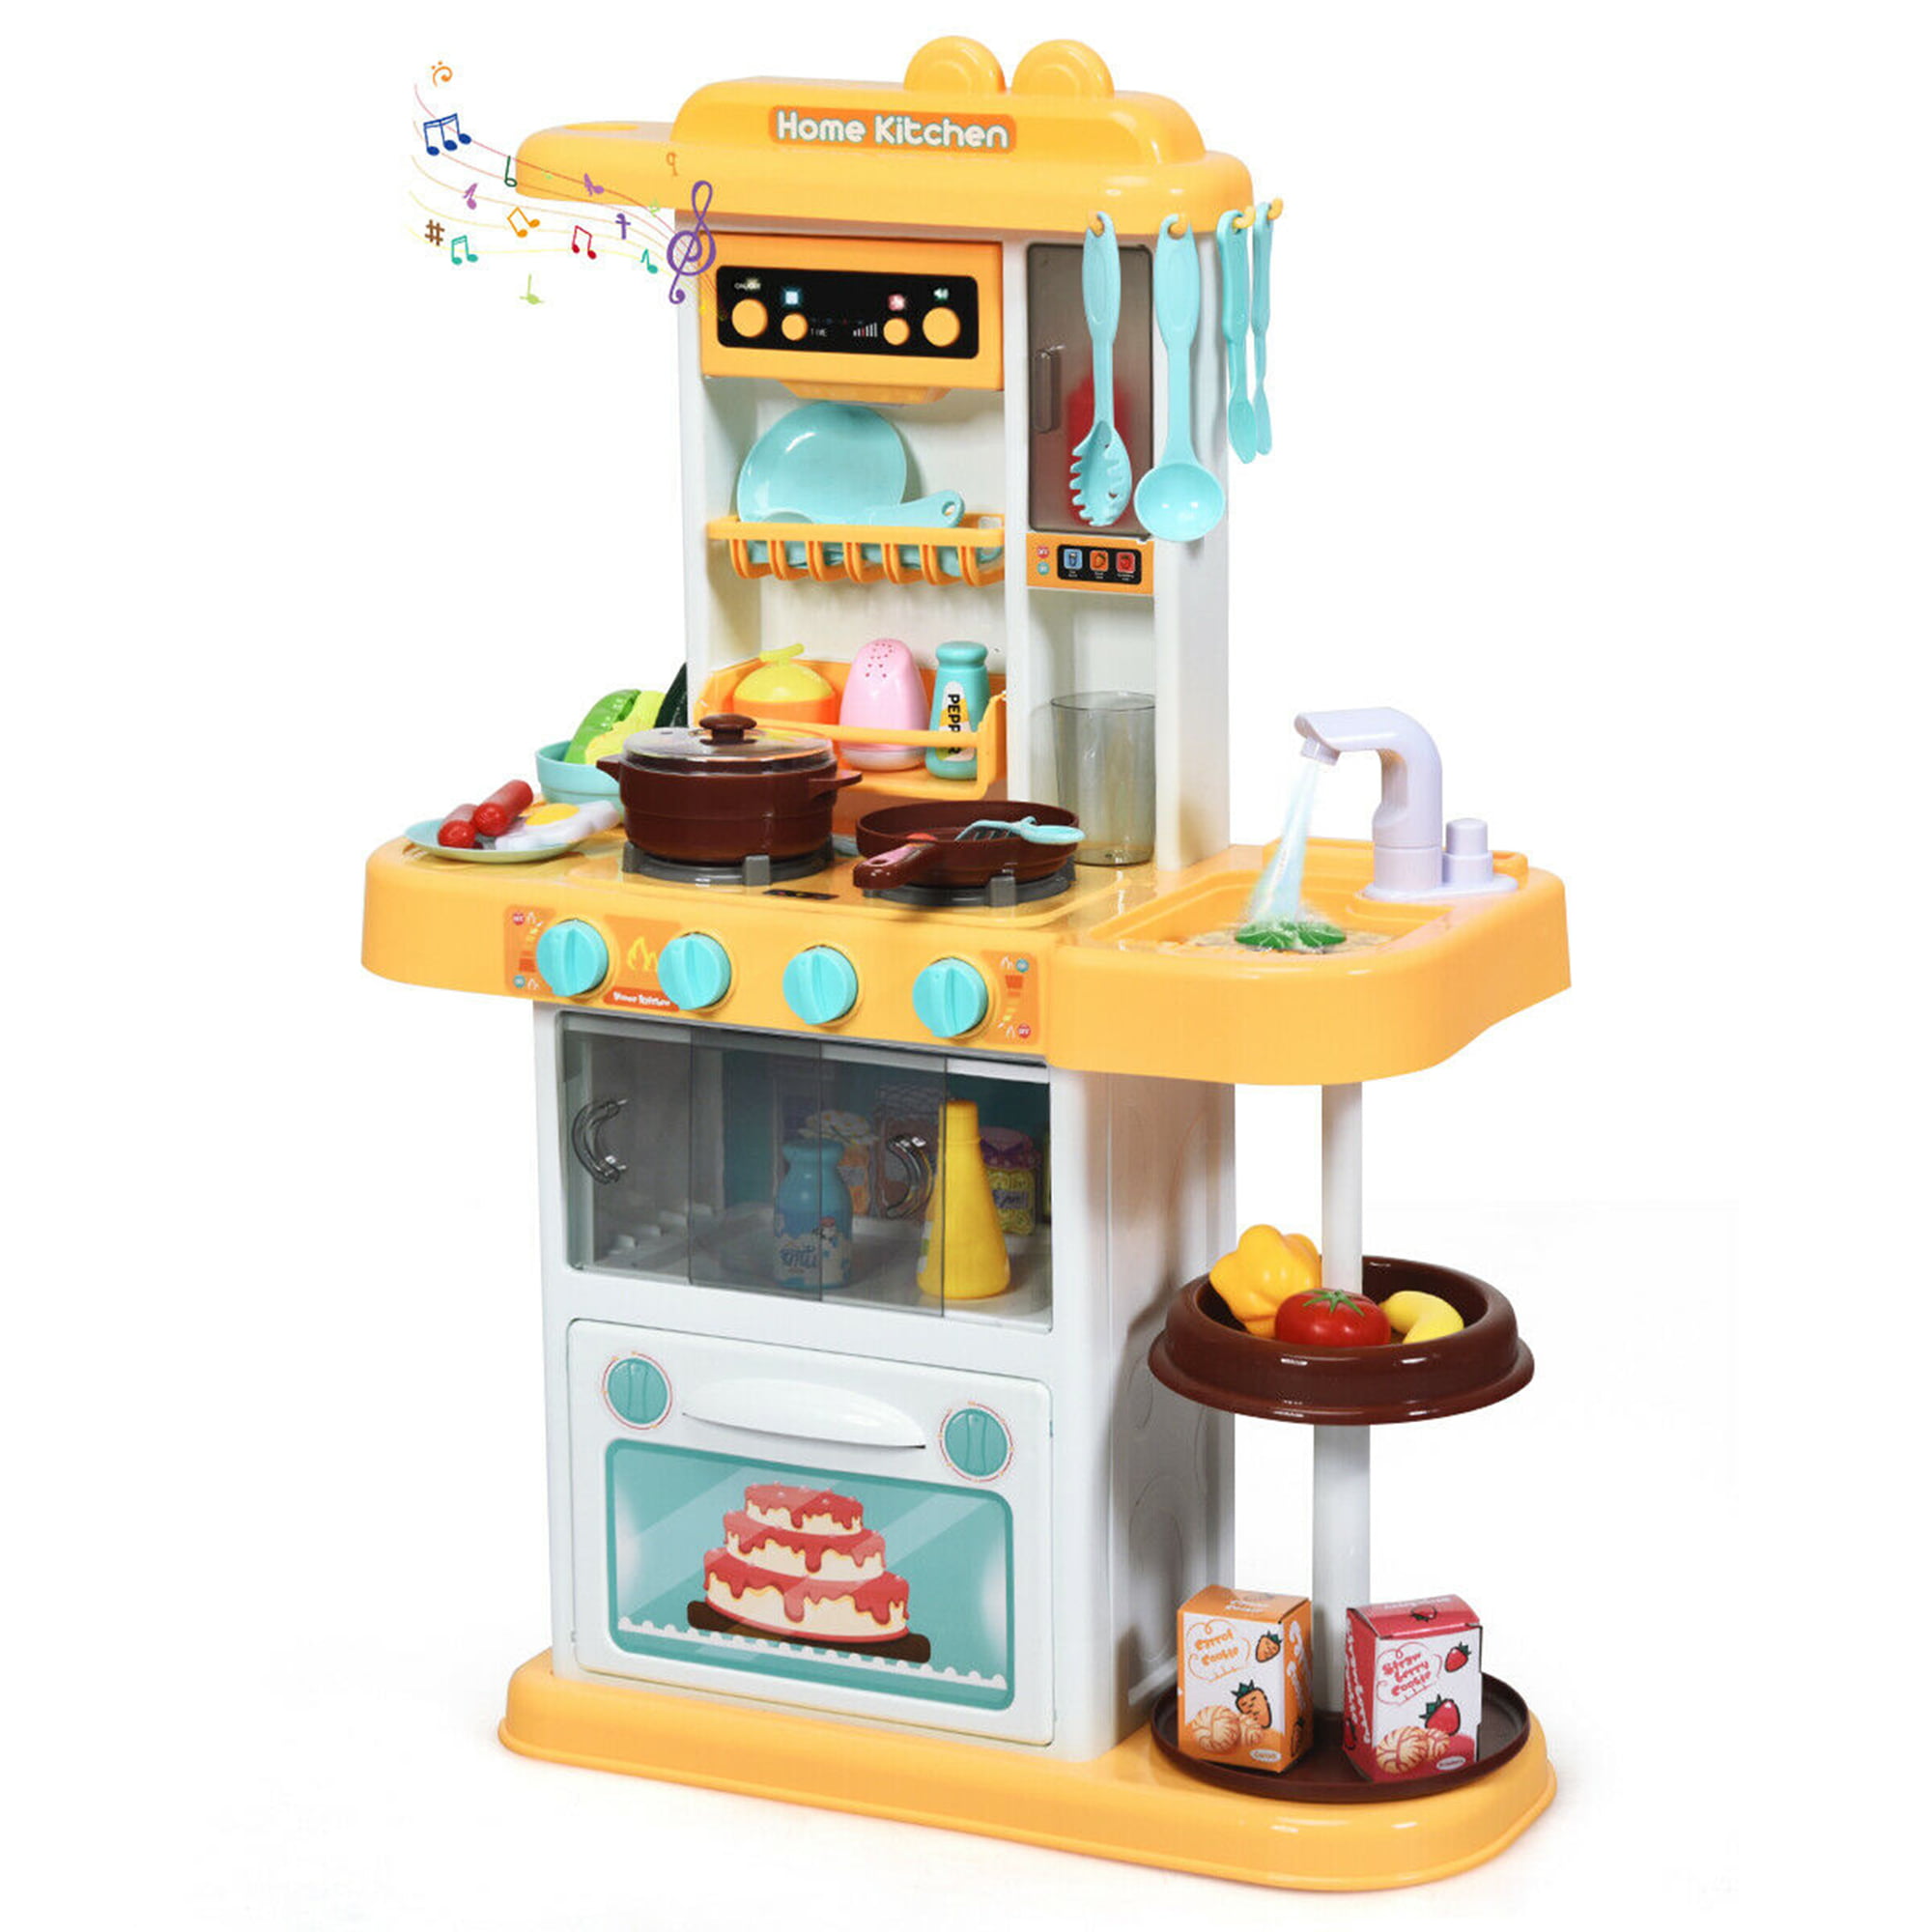 where can i play my disney kitchen for free